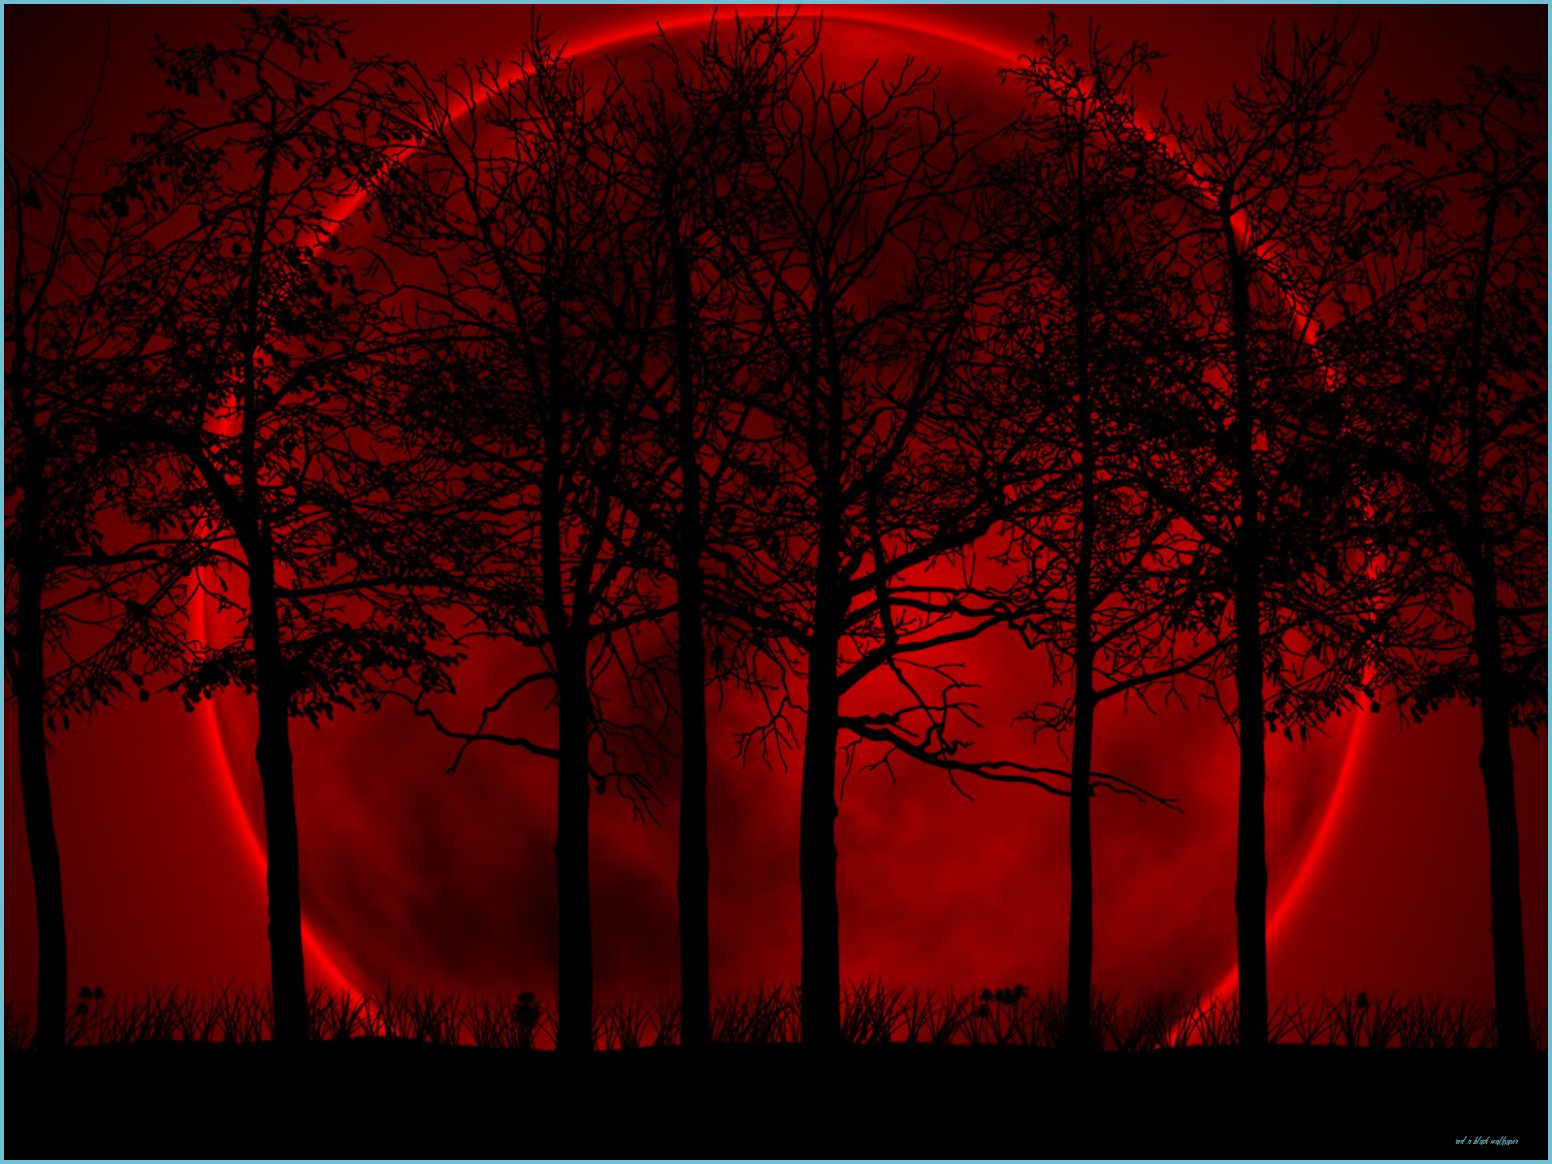 Red And Black Desktop Wallpaper Free Red And Black Desktop N Black Wallpaper